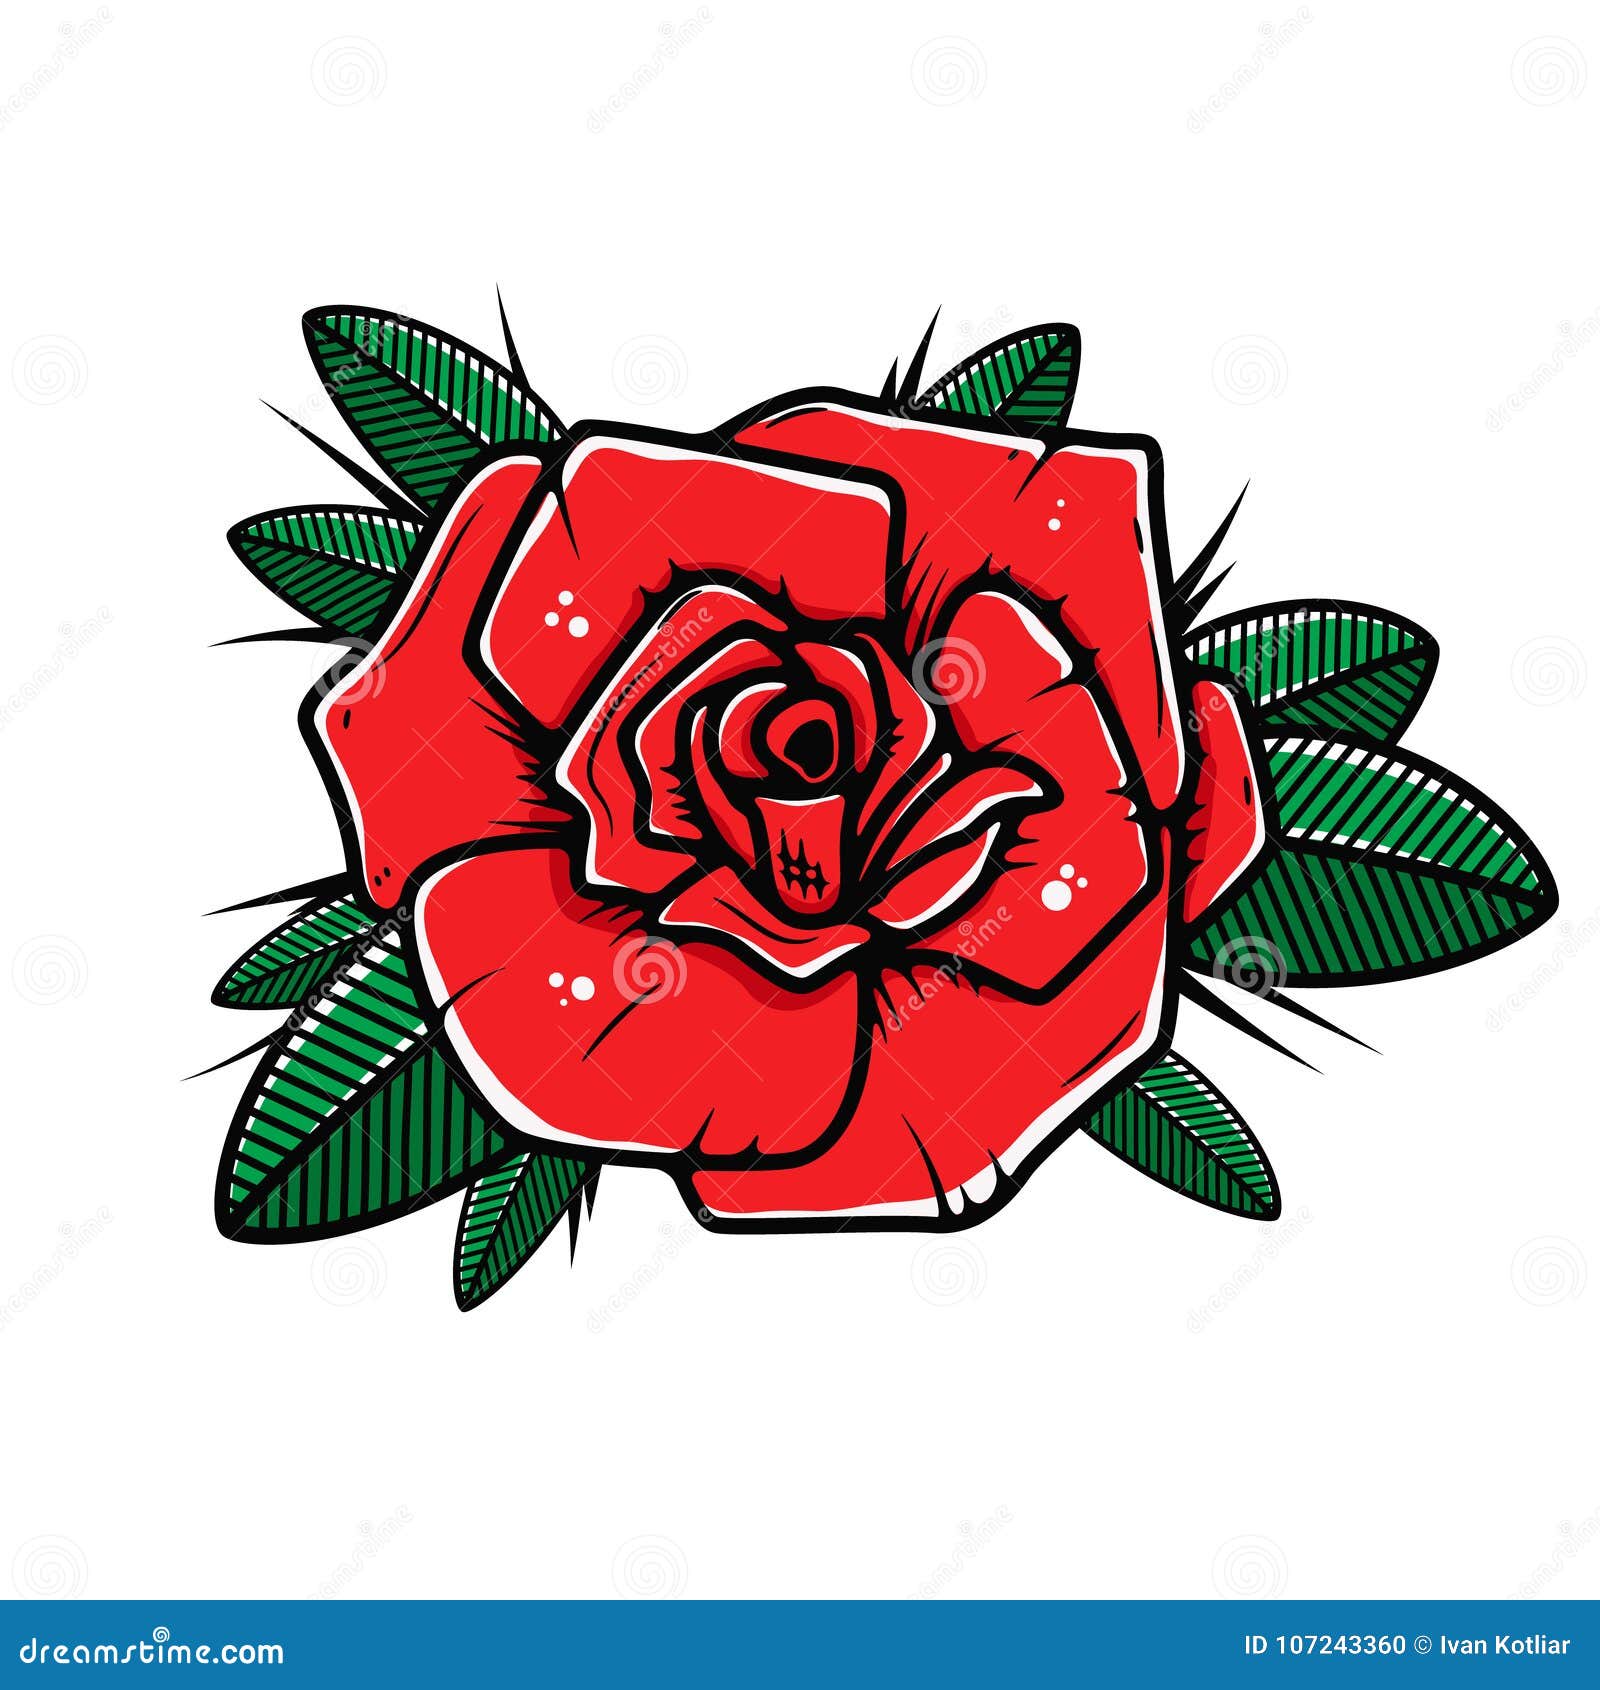 Micro-realistic red rose tattoo located on the top of